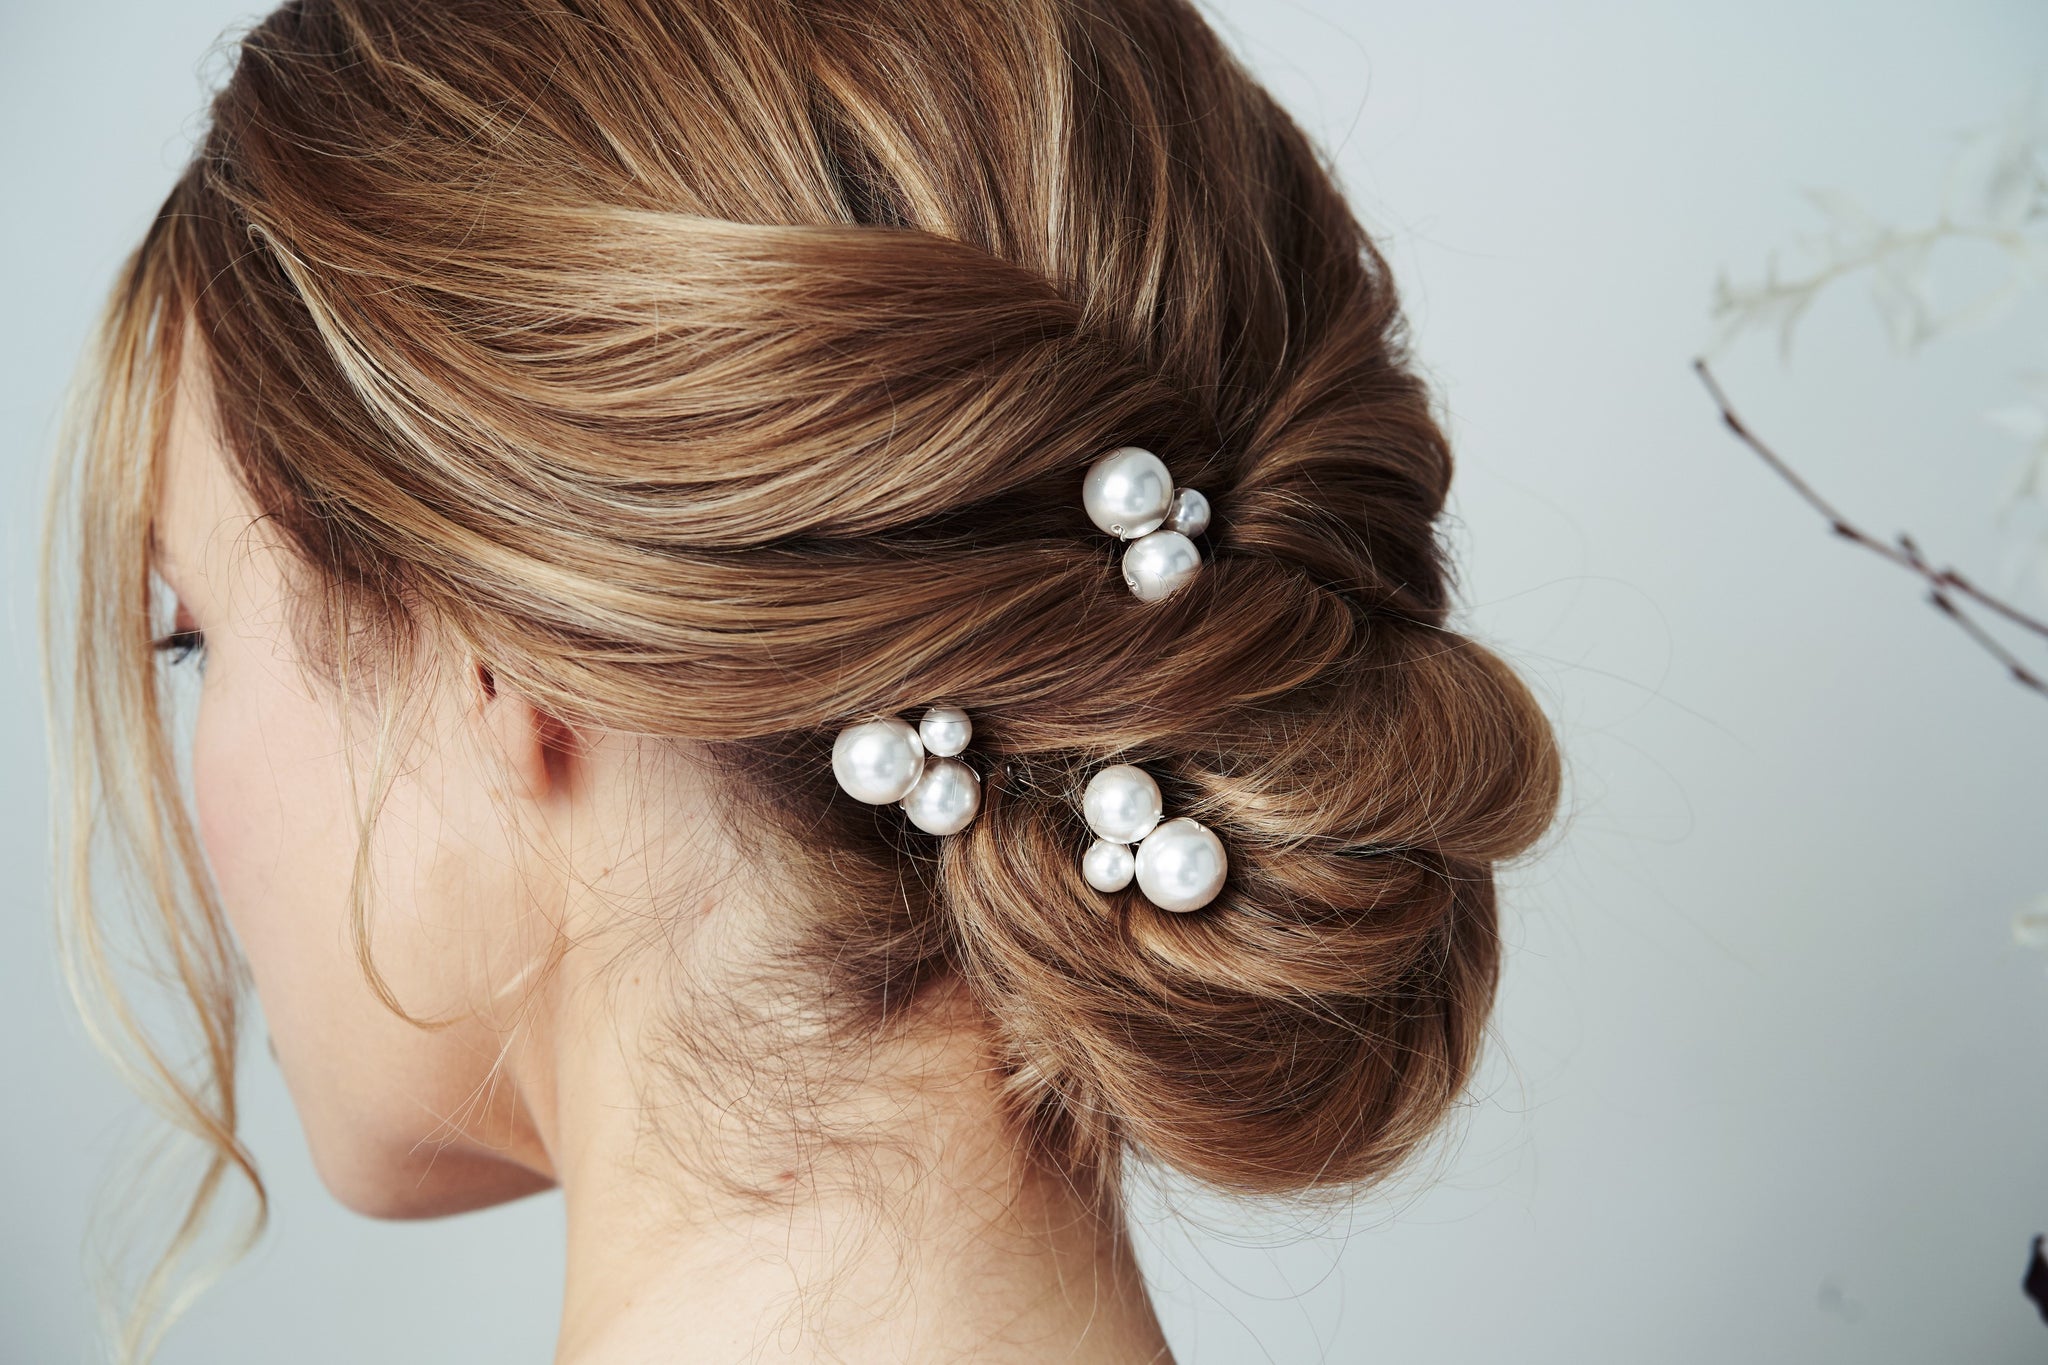 The Perla hair pins shows the quality of expensive pearl accessories